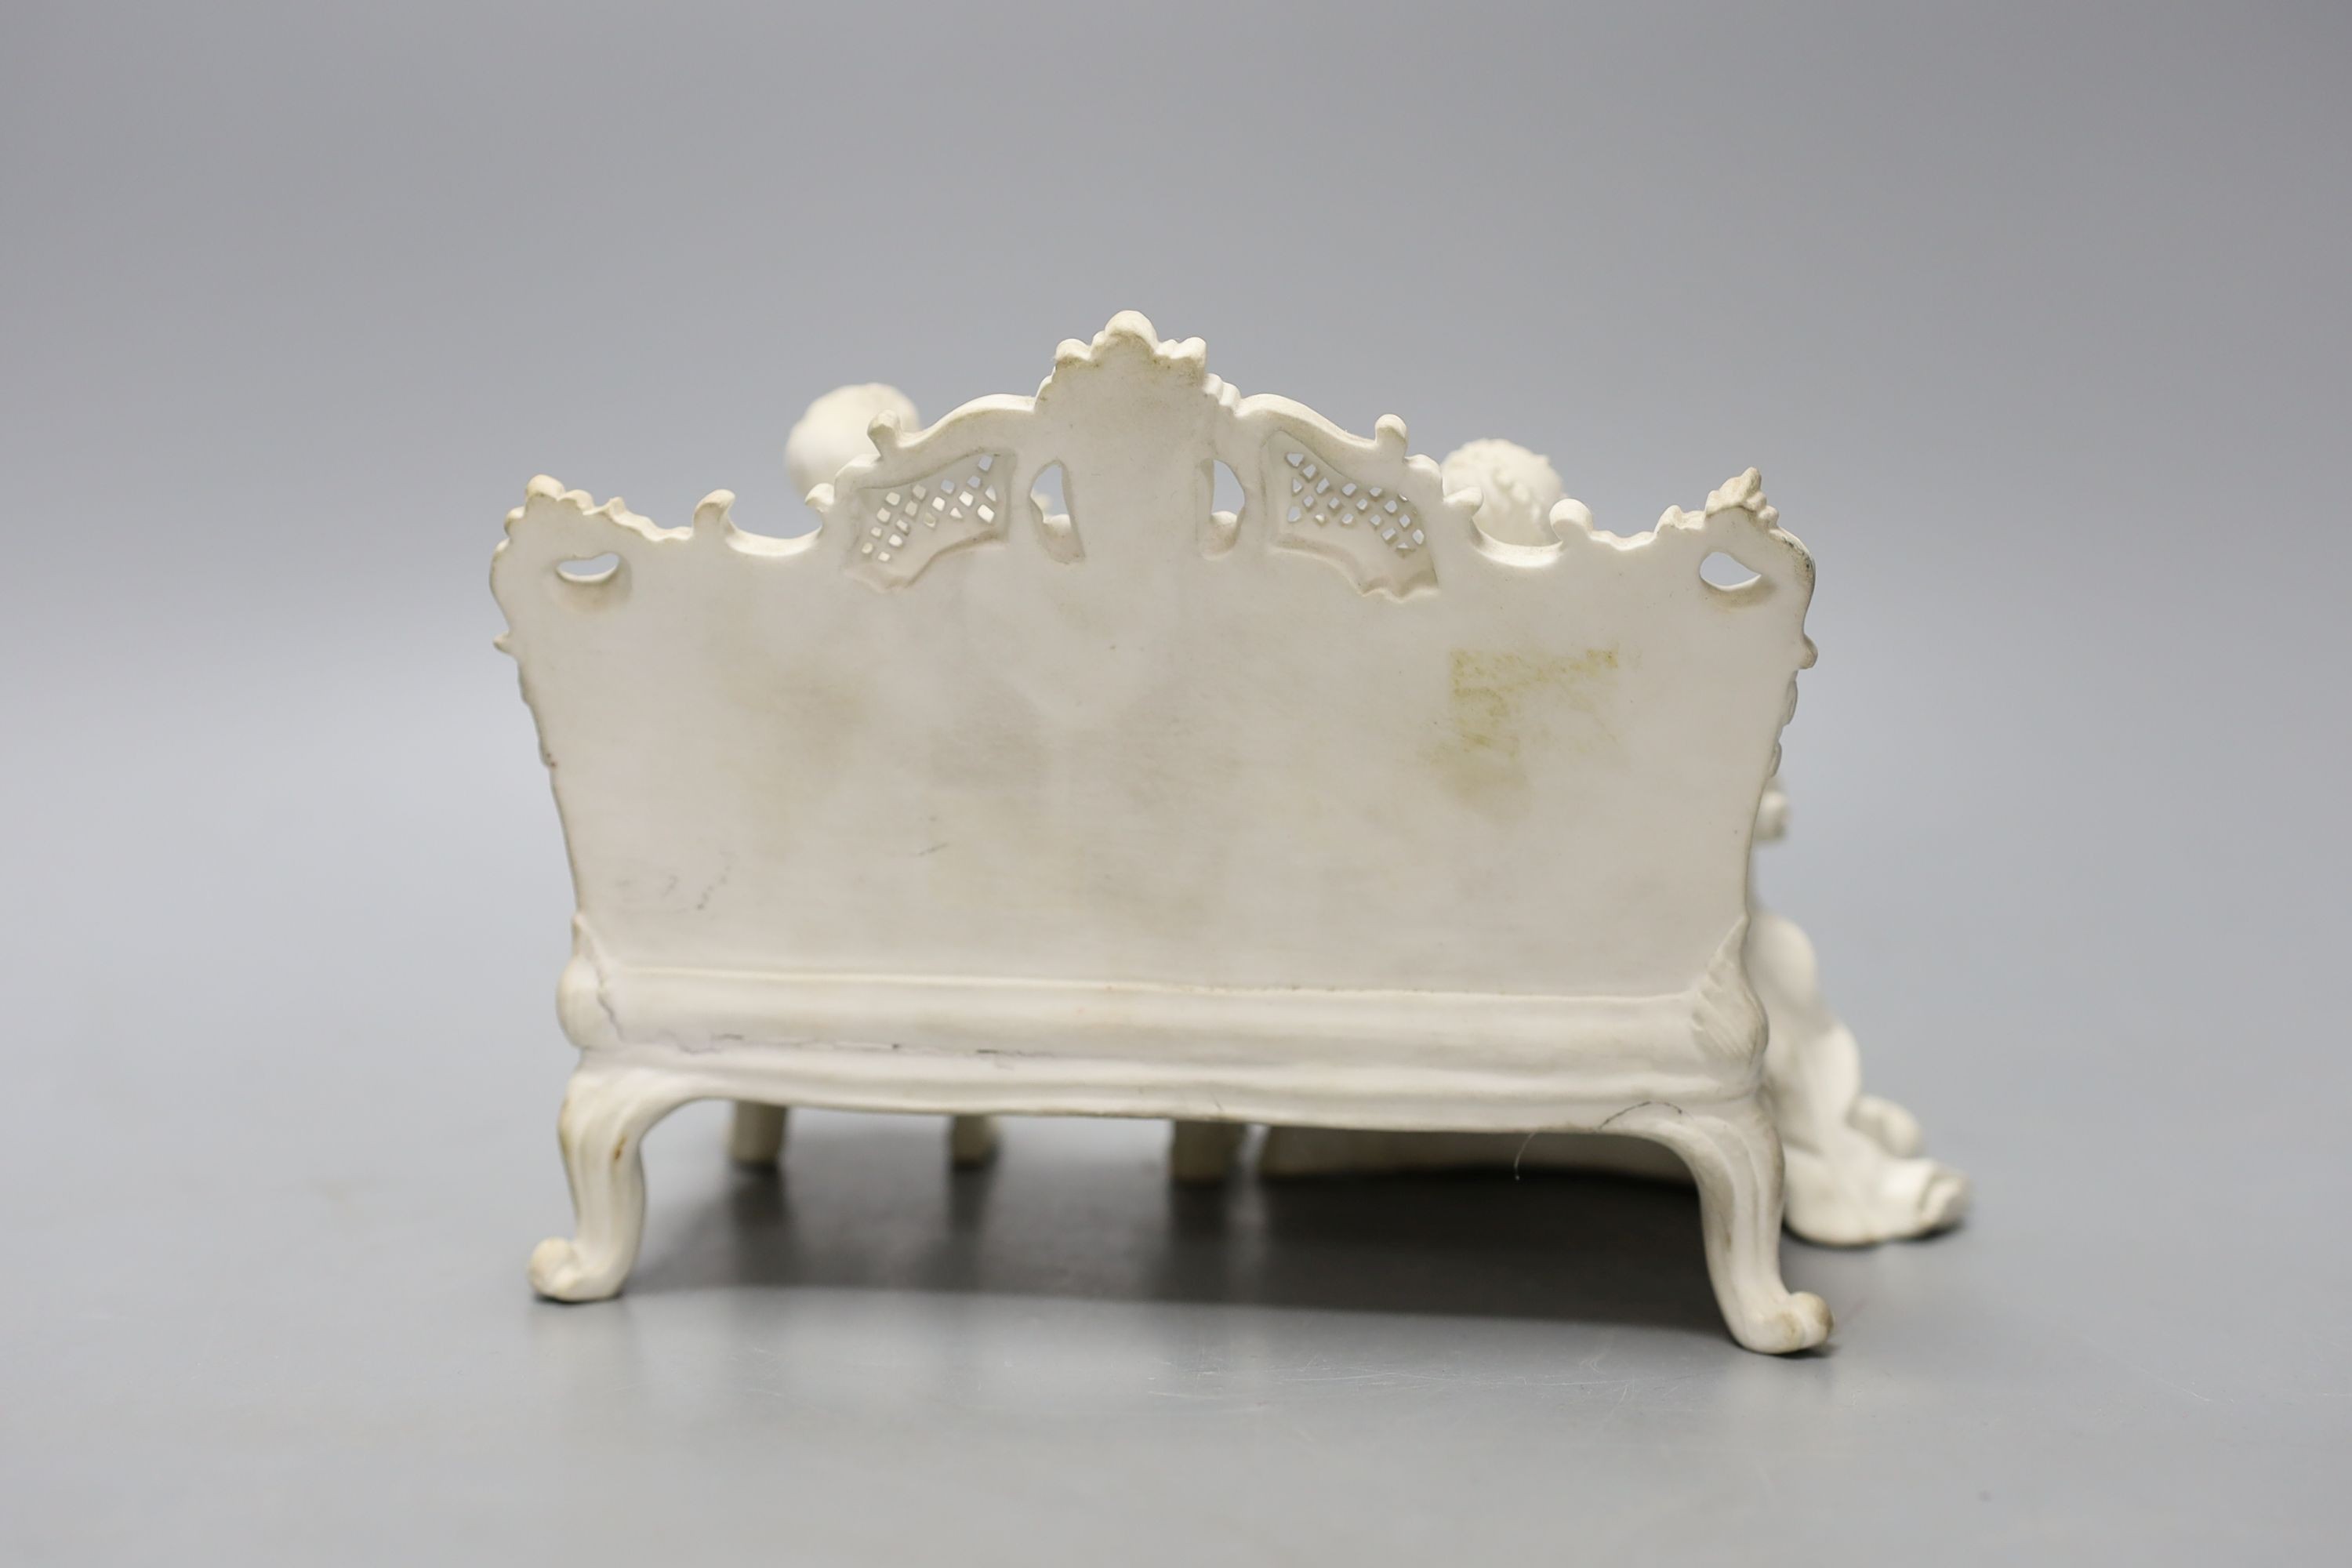 19th century English biscuit group of a woman with a mandolin and a man with a flute seated on an elaborate settee, 20 cm wide